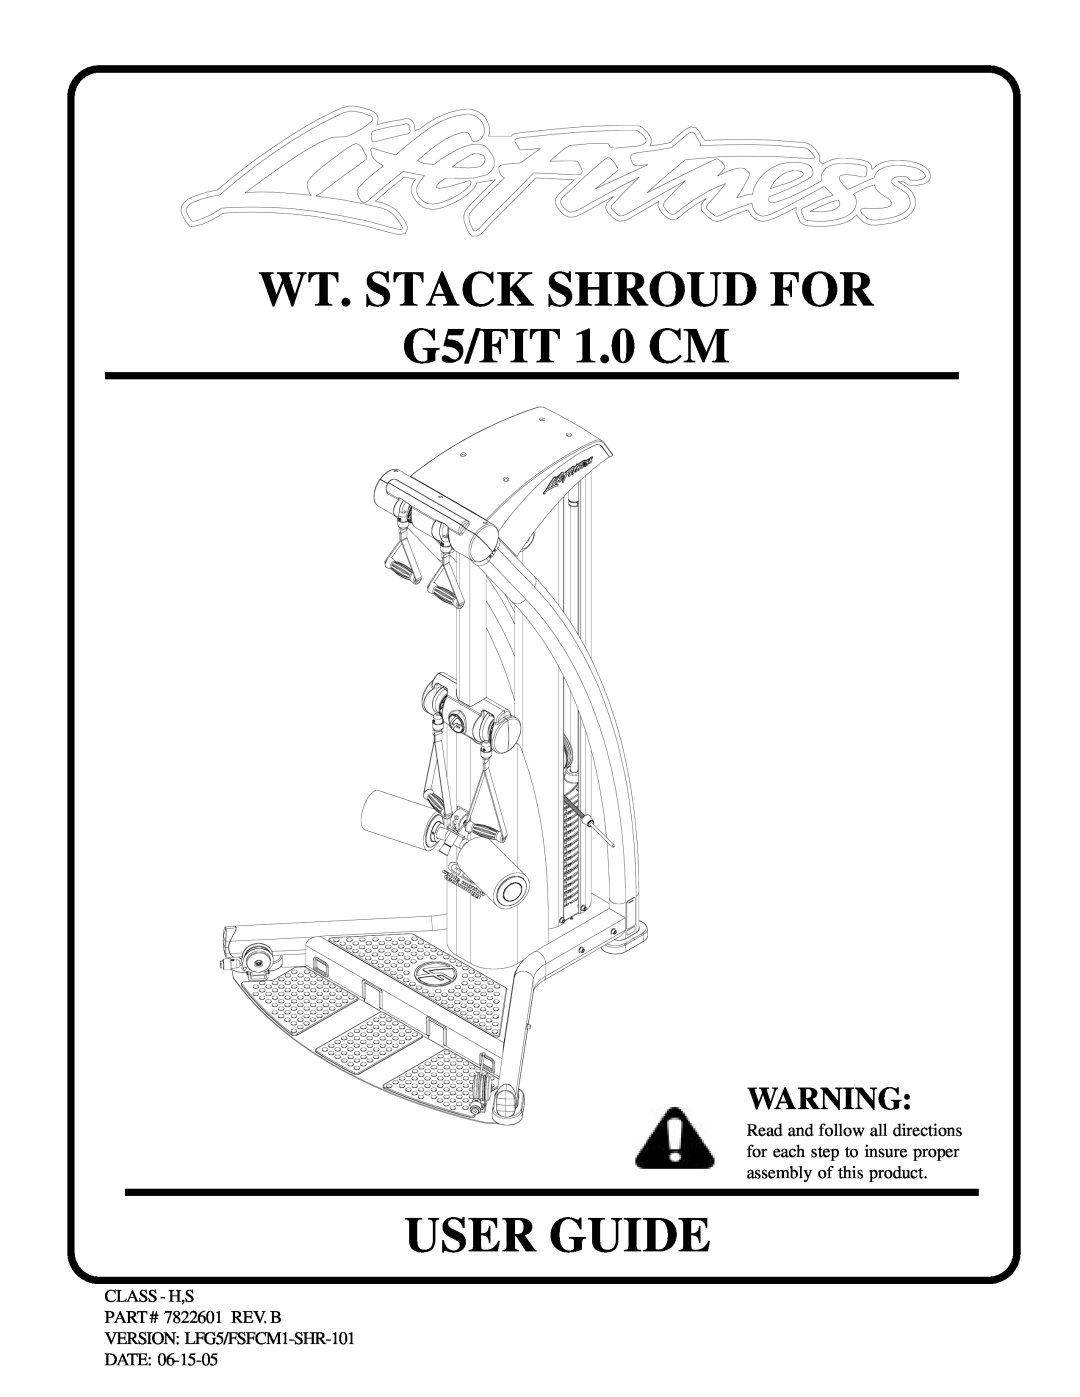 Life Fitness G5/FIT 1.0 CM manual Wt. Stack Shroud For, User Guide 